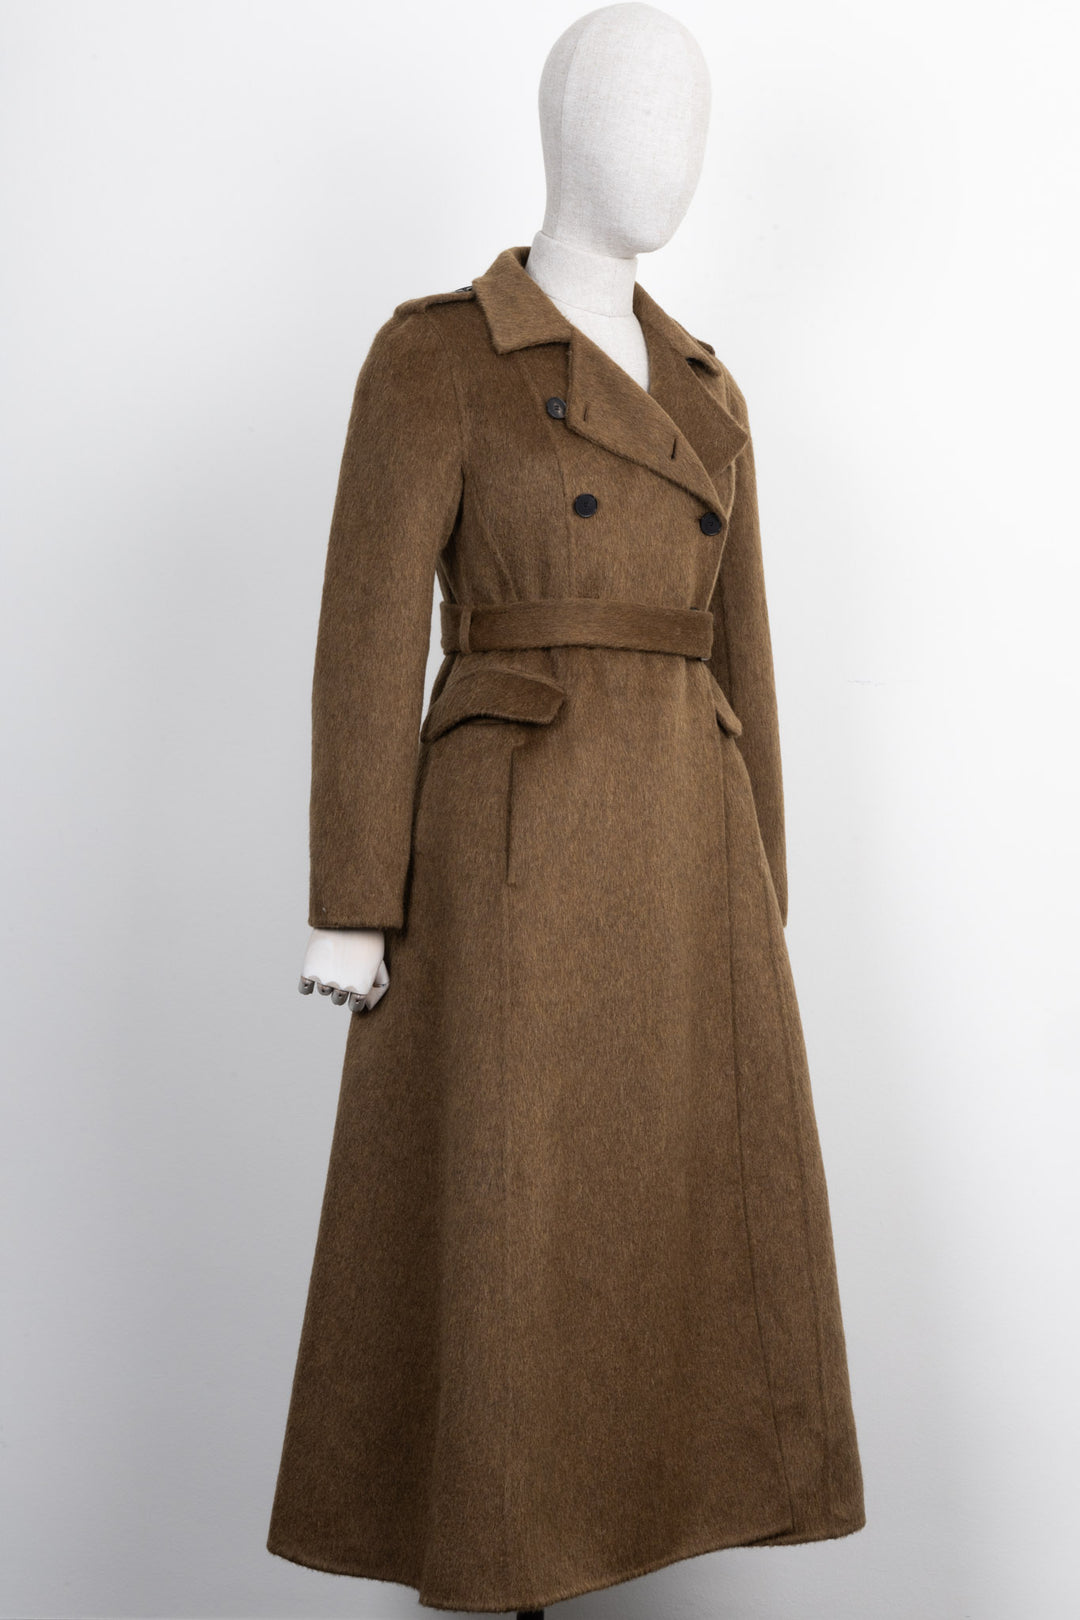 CHRISTIAN DIOR Double Breasted Coat Olive